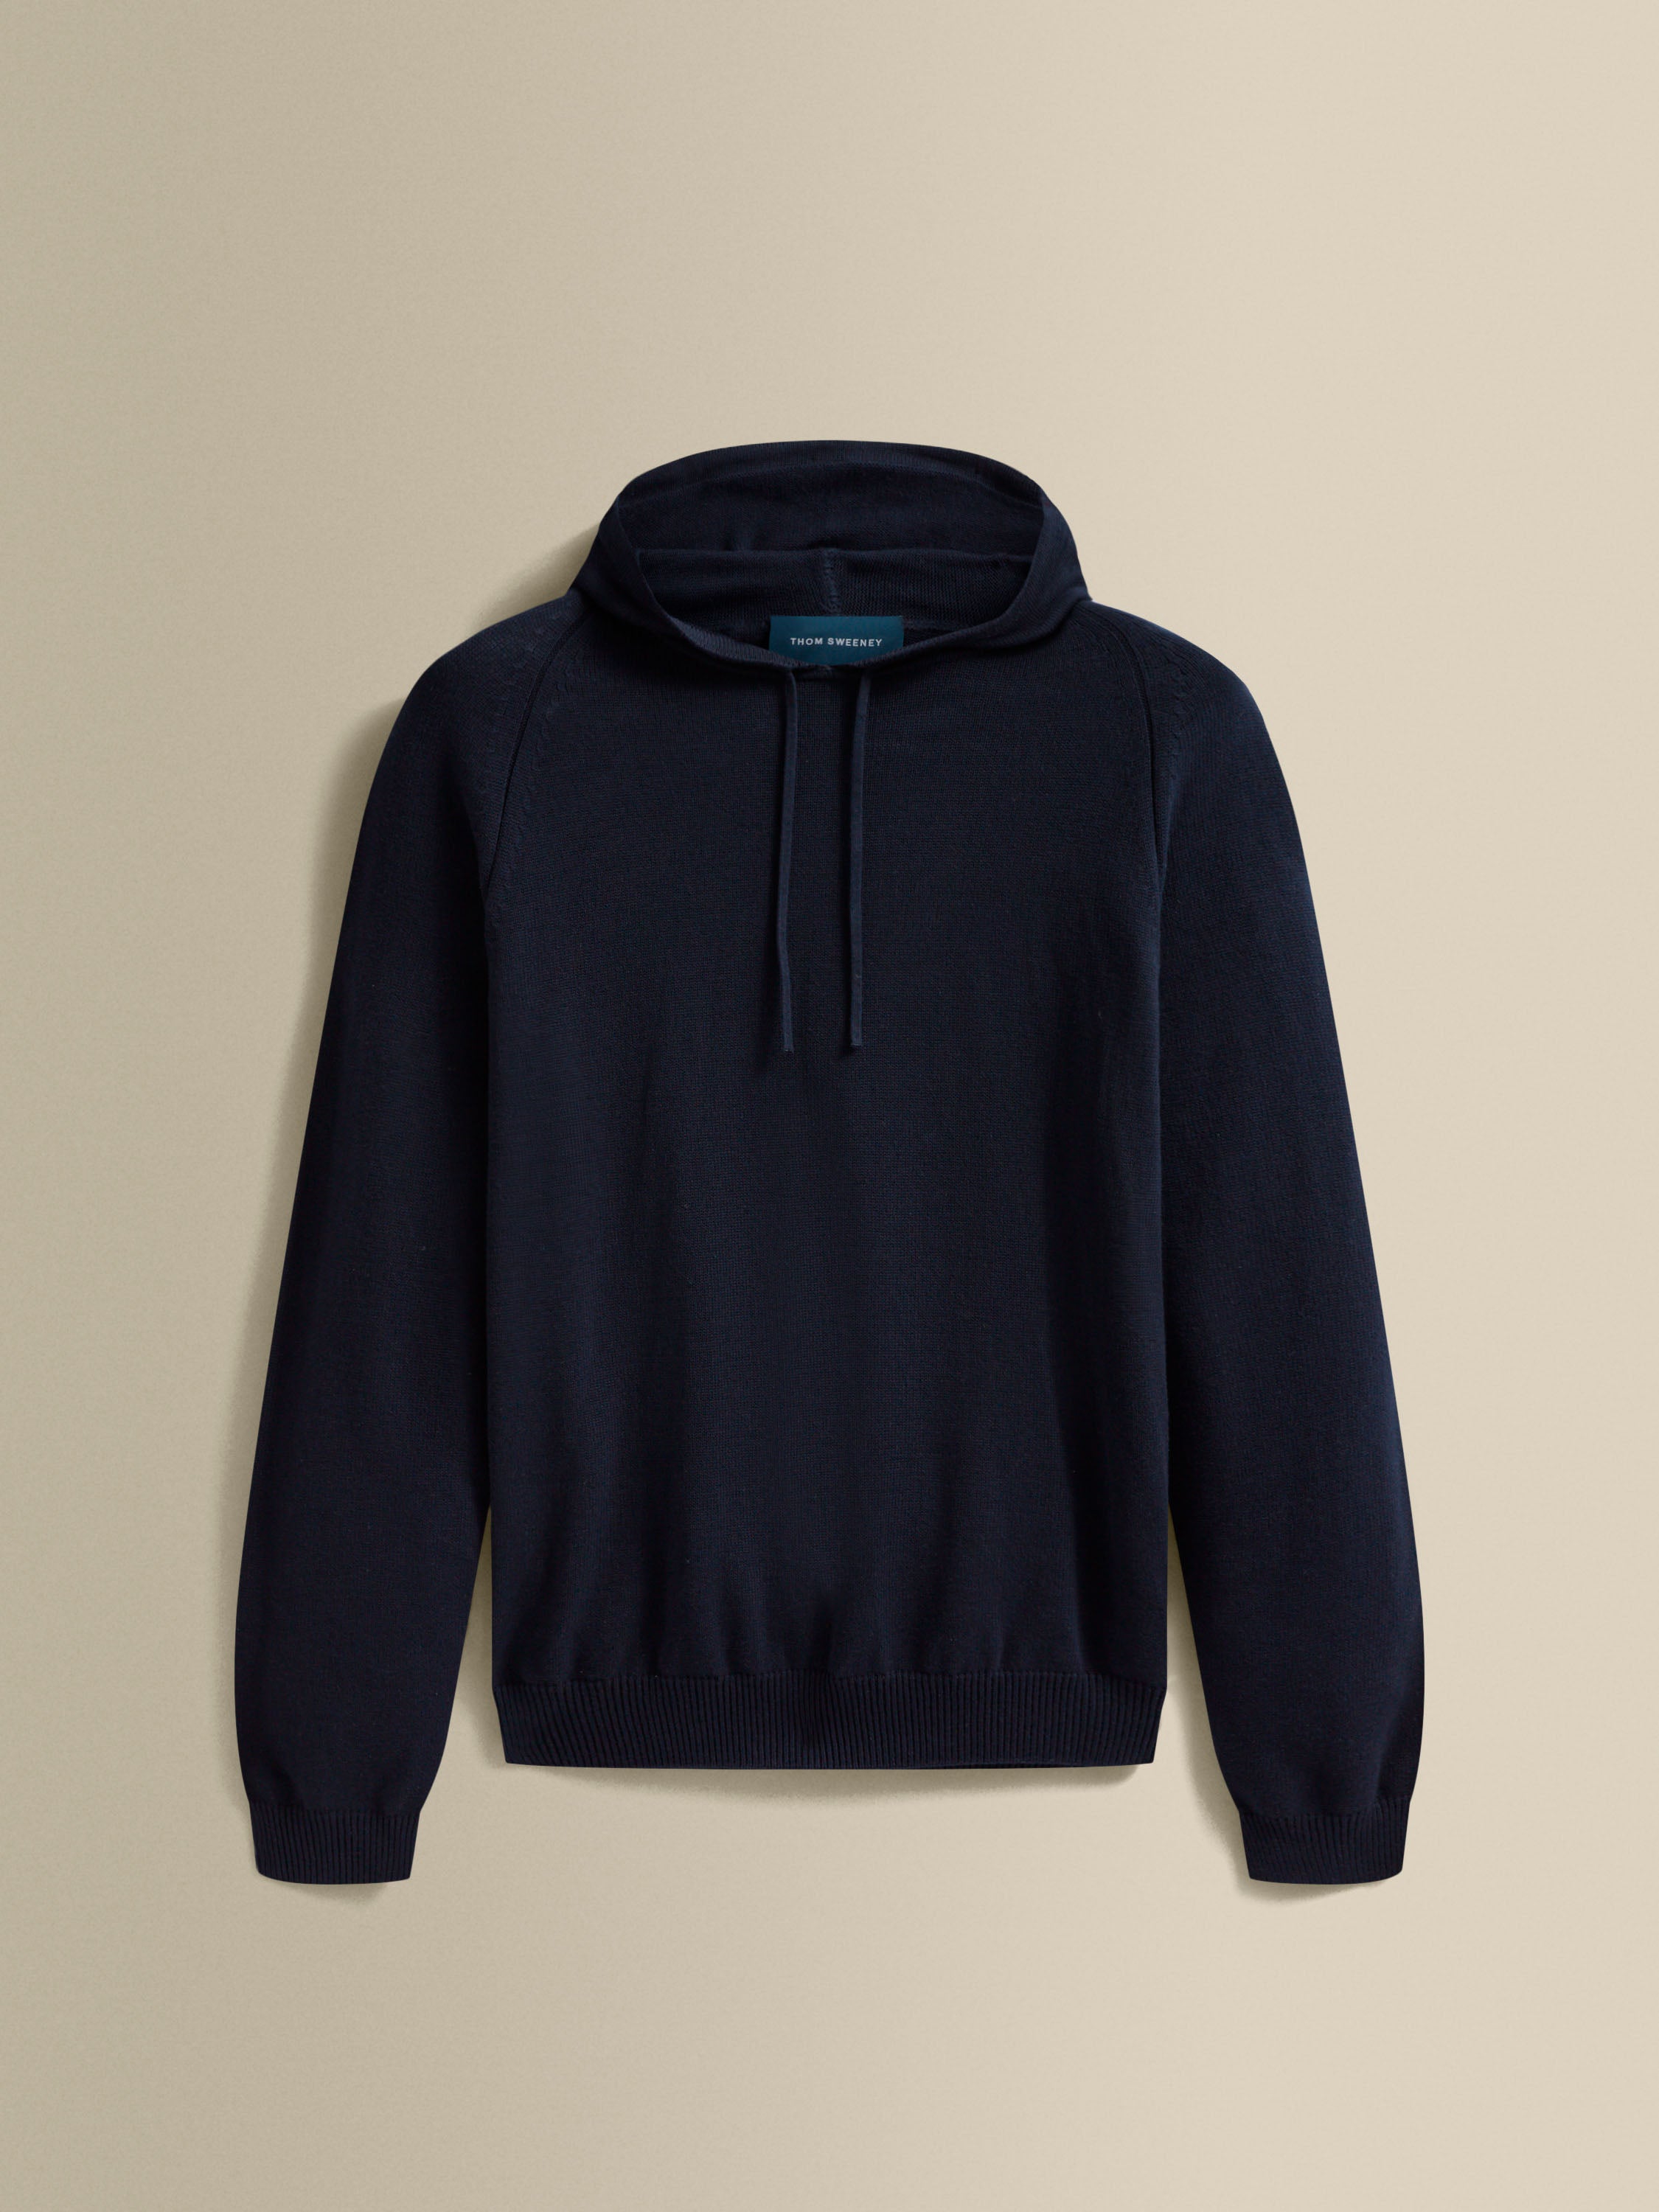 Cotton Cable Hoodie Navy Product Image